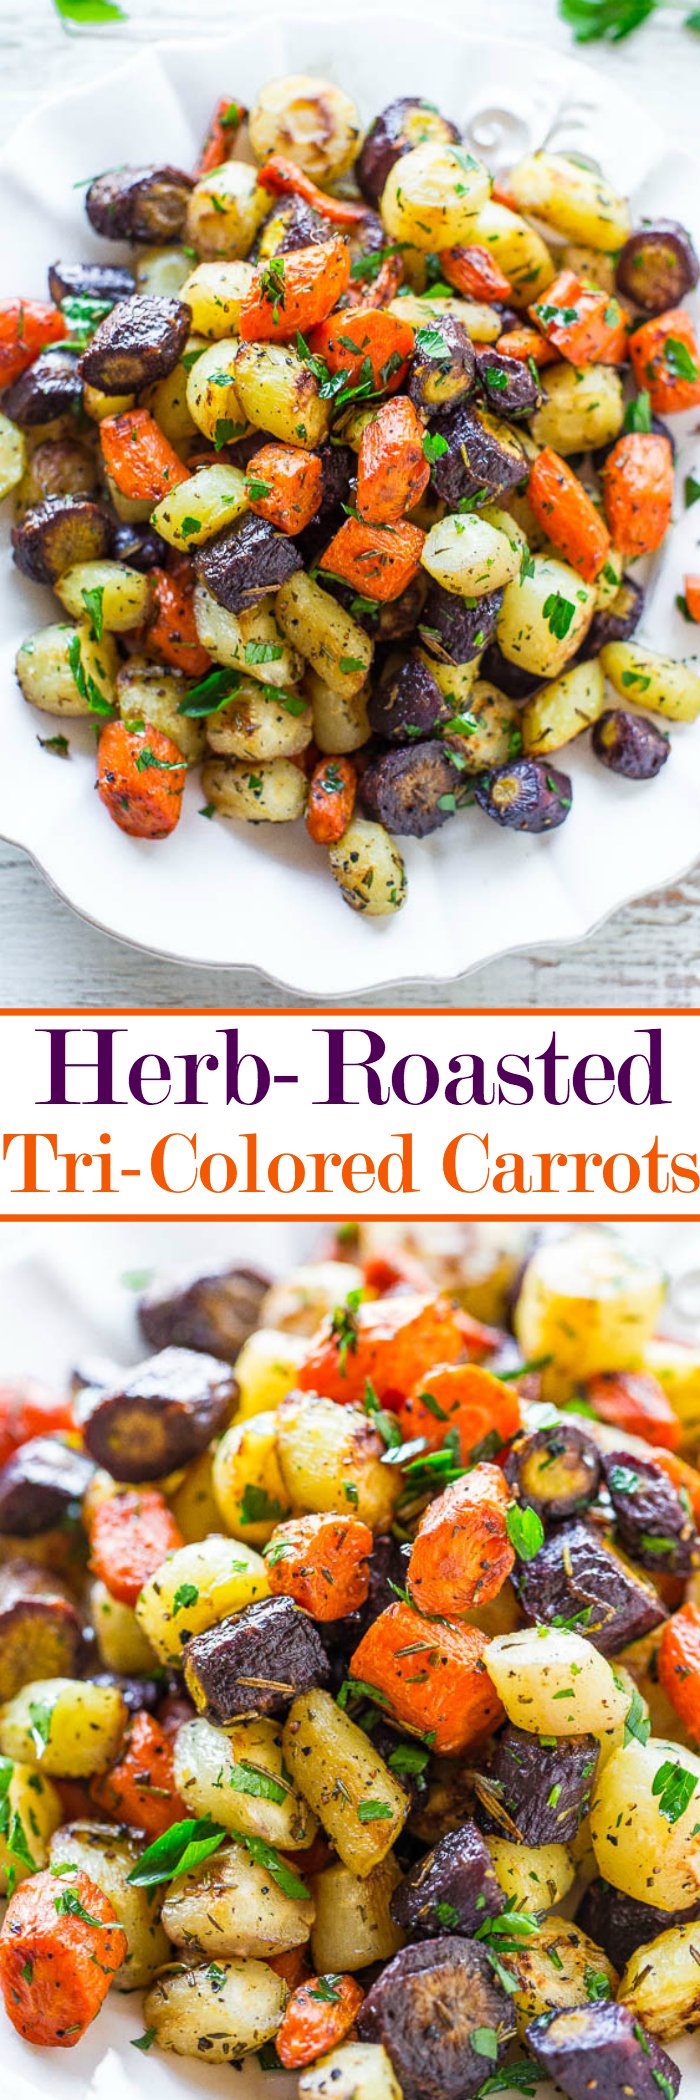 Herb-Roasted Tri-Colored Carrots - Lightly caramelized around the edges, crisp-tender in the center, and seasoned with rosemary, thyme, and parsley!! A trusty side that you'll make again and again for holidays or easy weeknight dinners!!